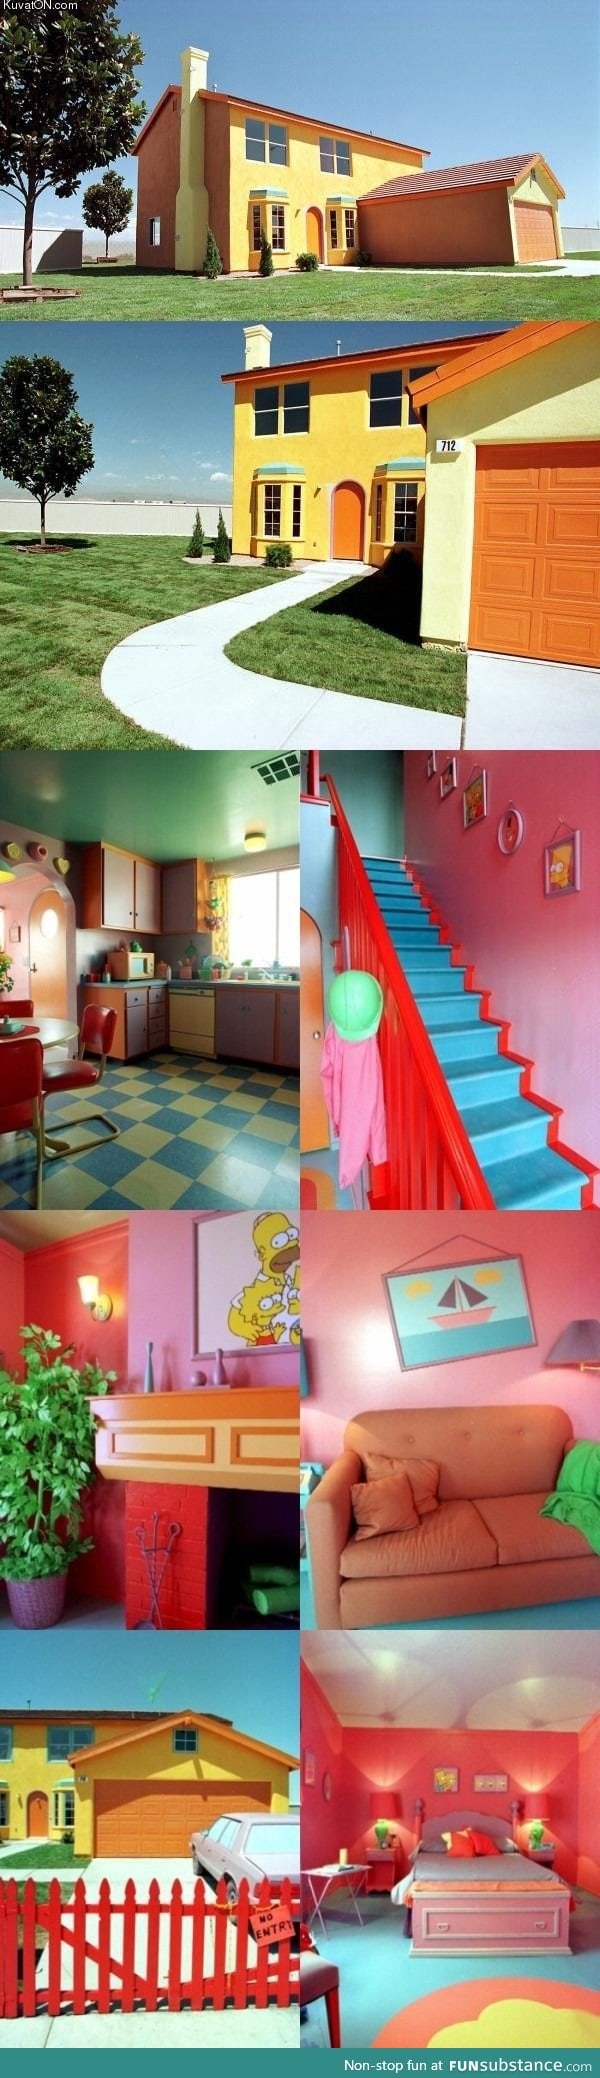 Real Life Simpsons house